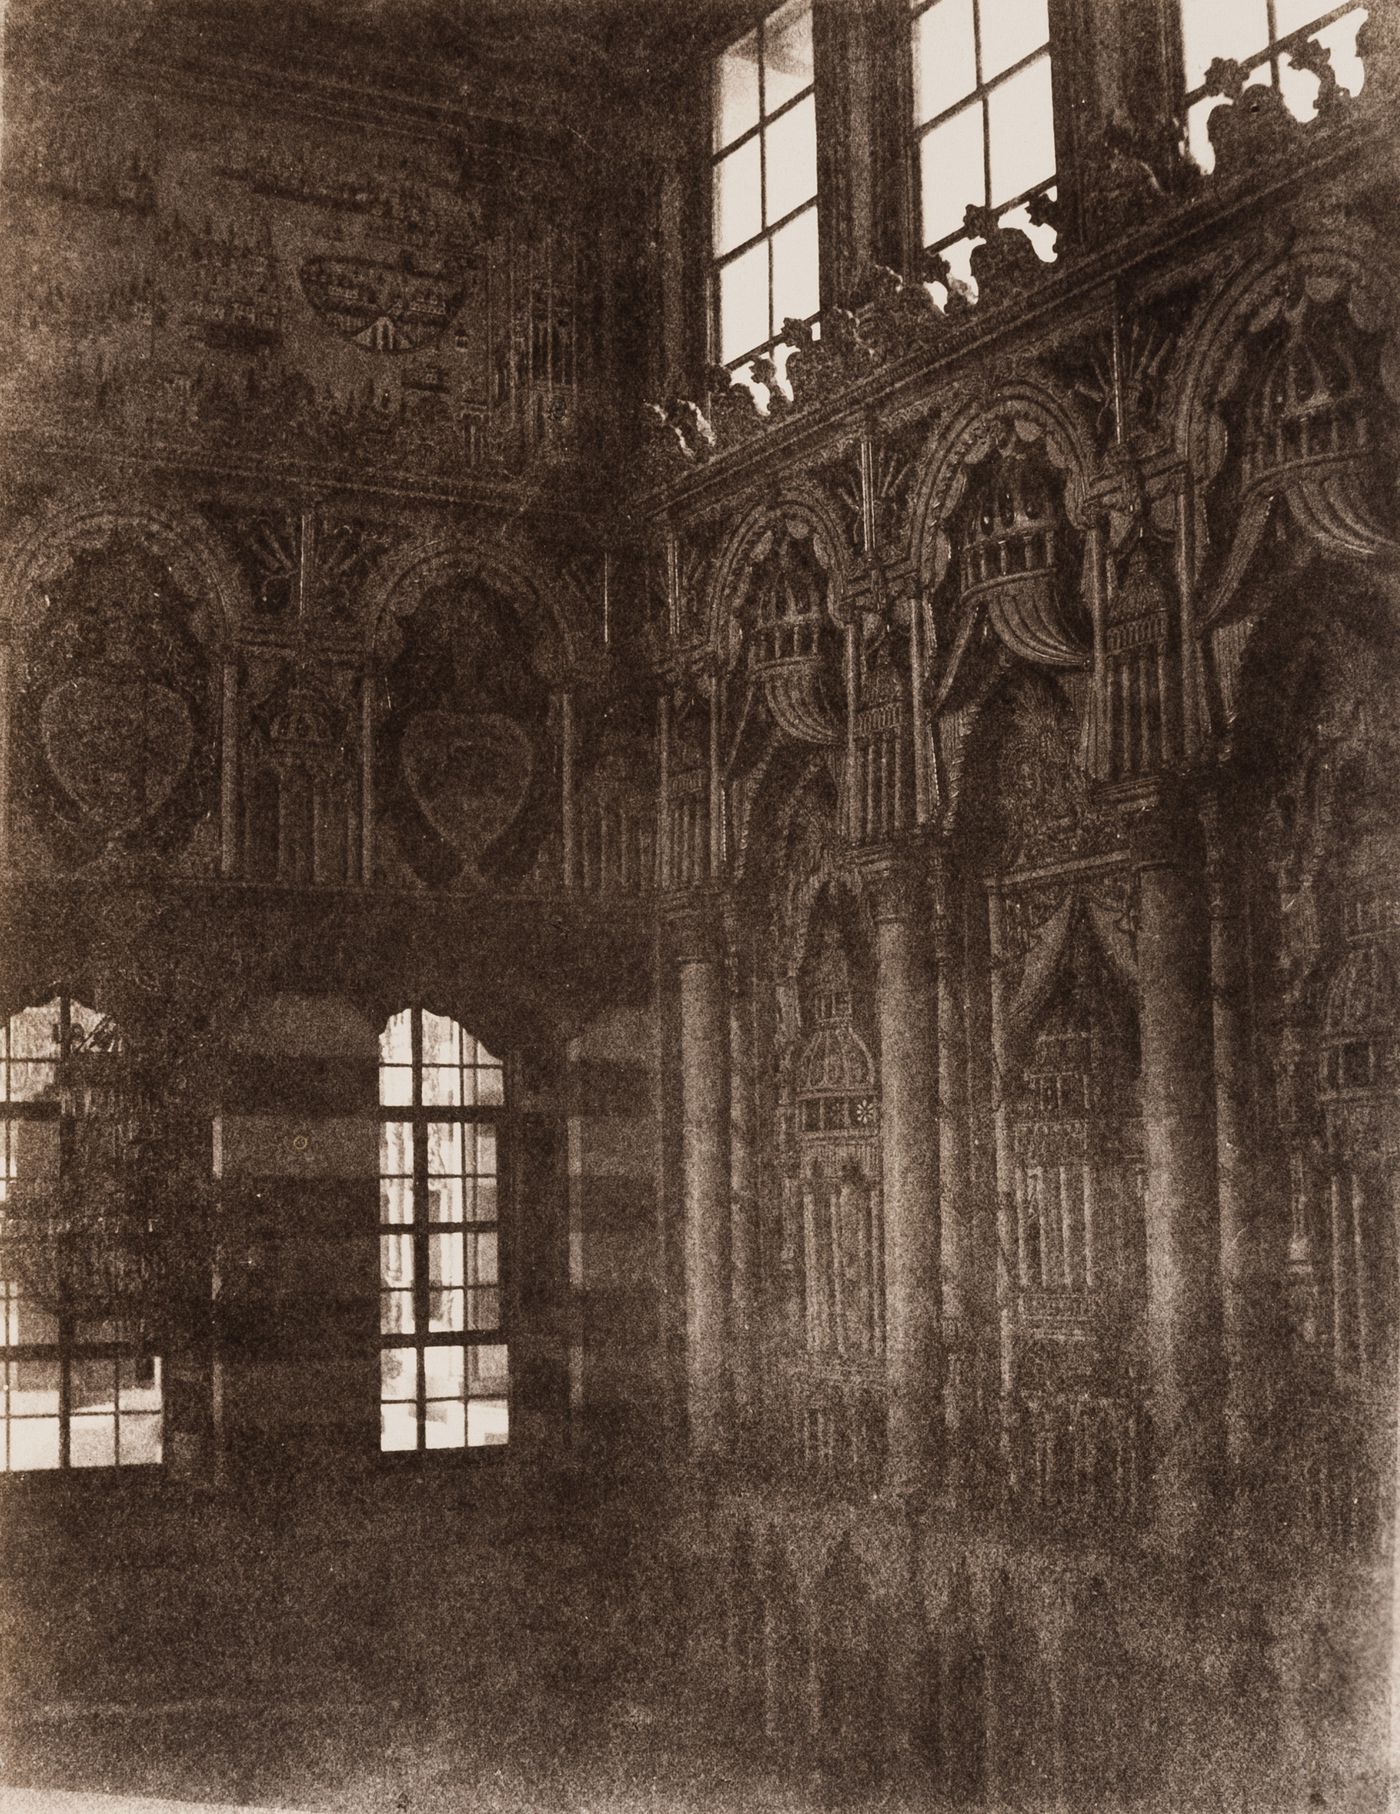 View of reception room of Beit Lisbona, Damascus, Syria